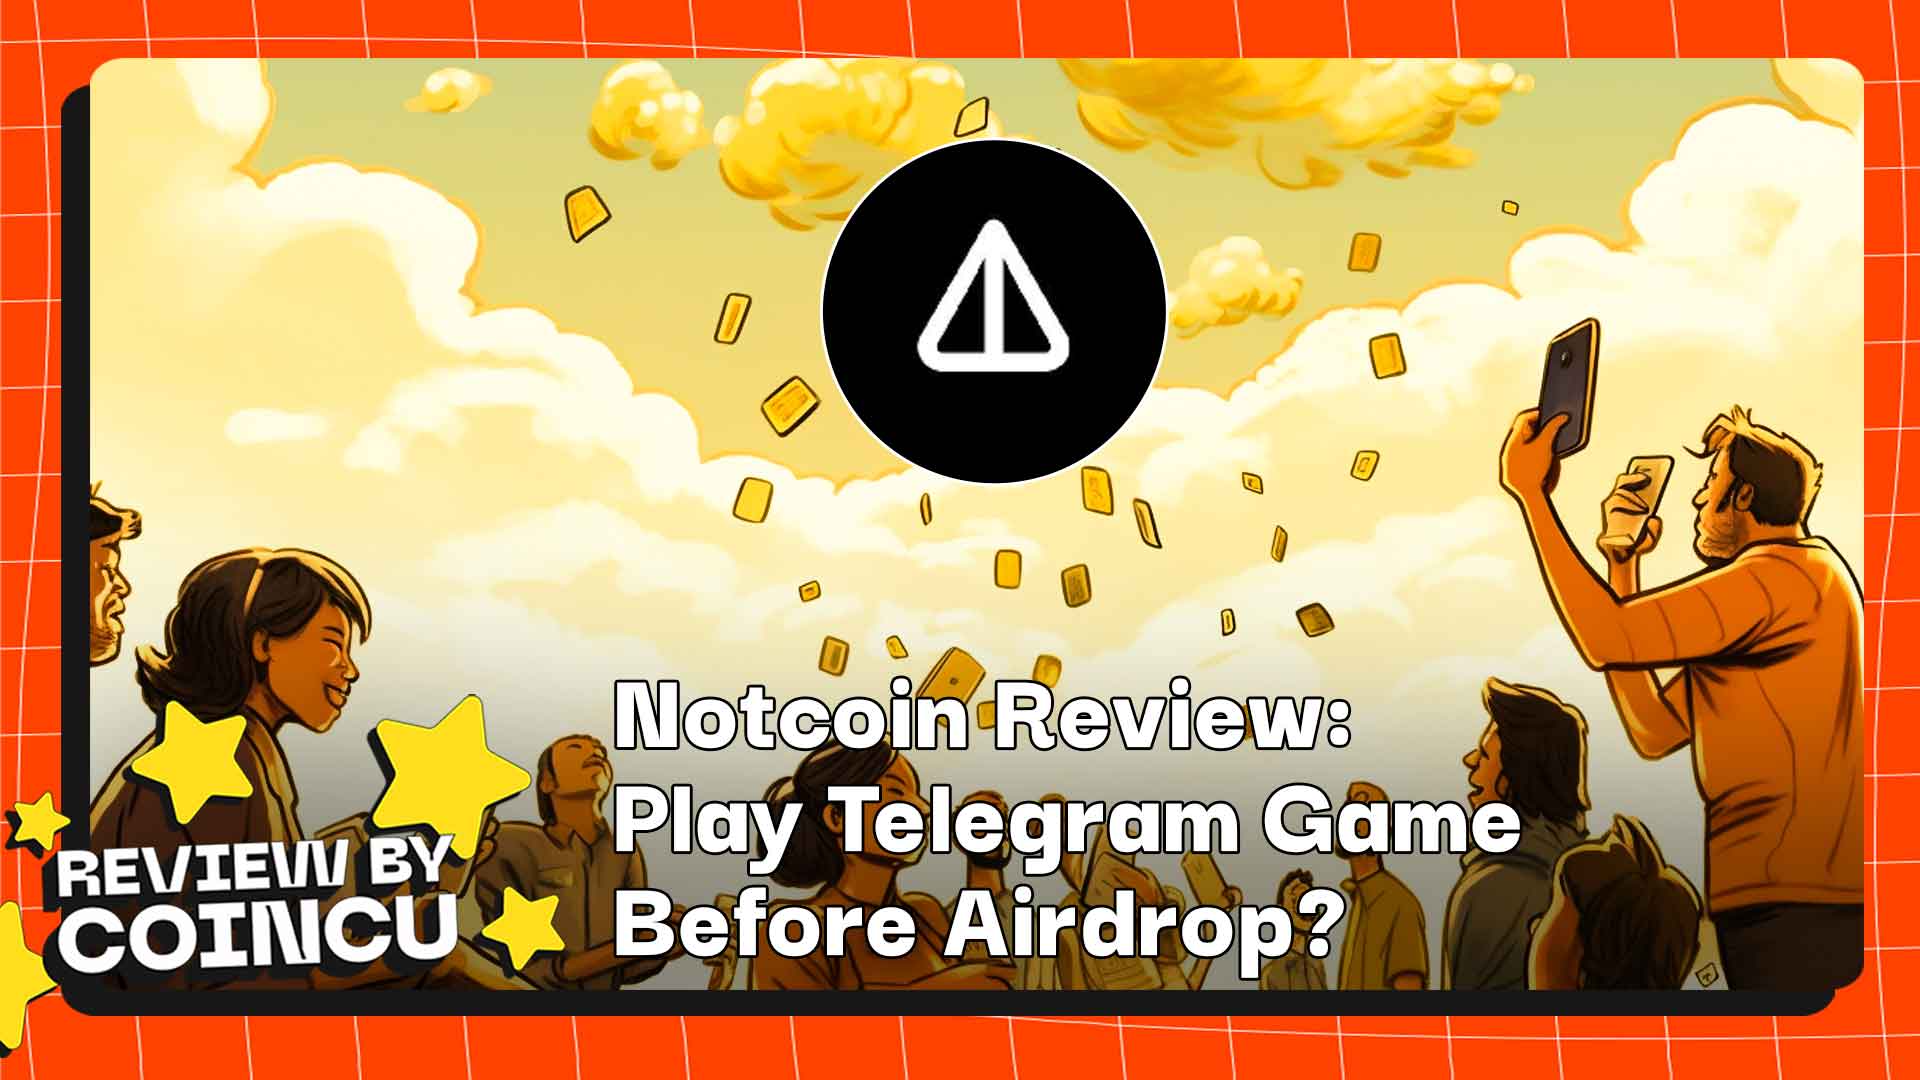 Notcoin Review Play Telegram Game Before Airdrop